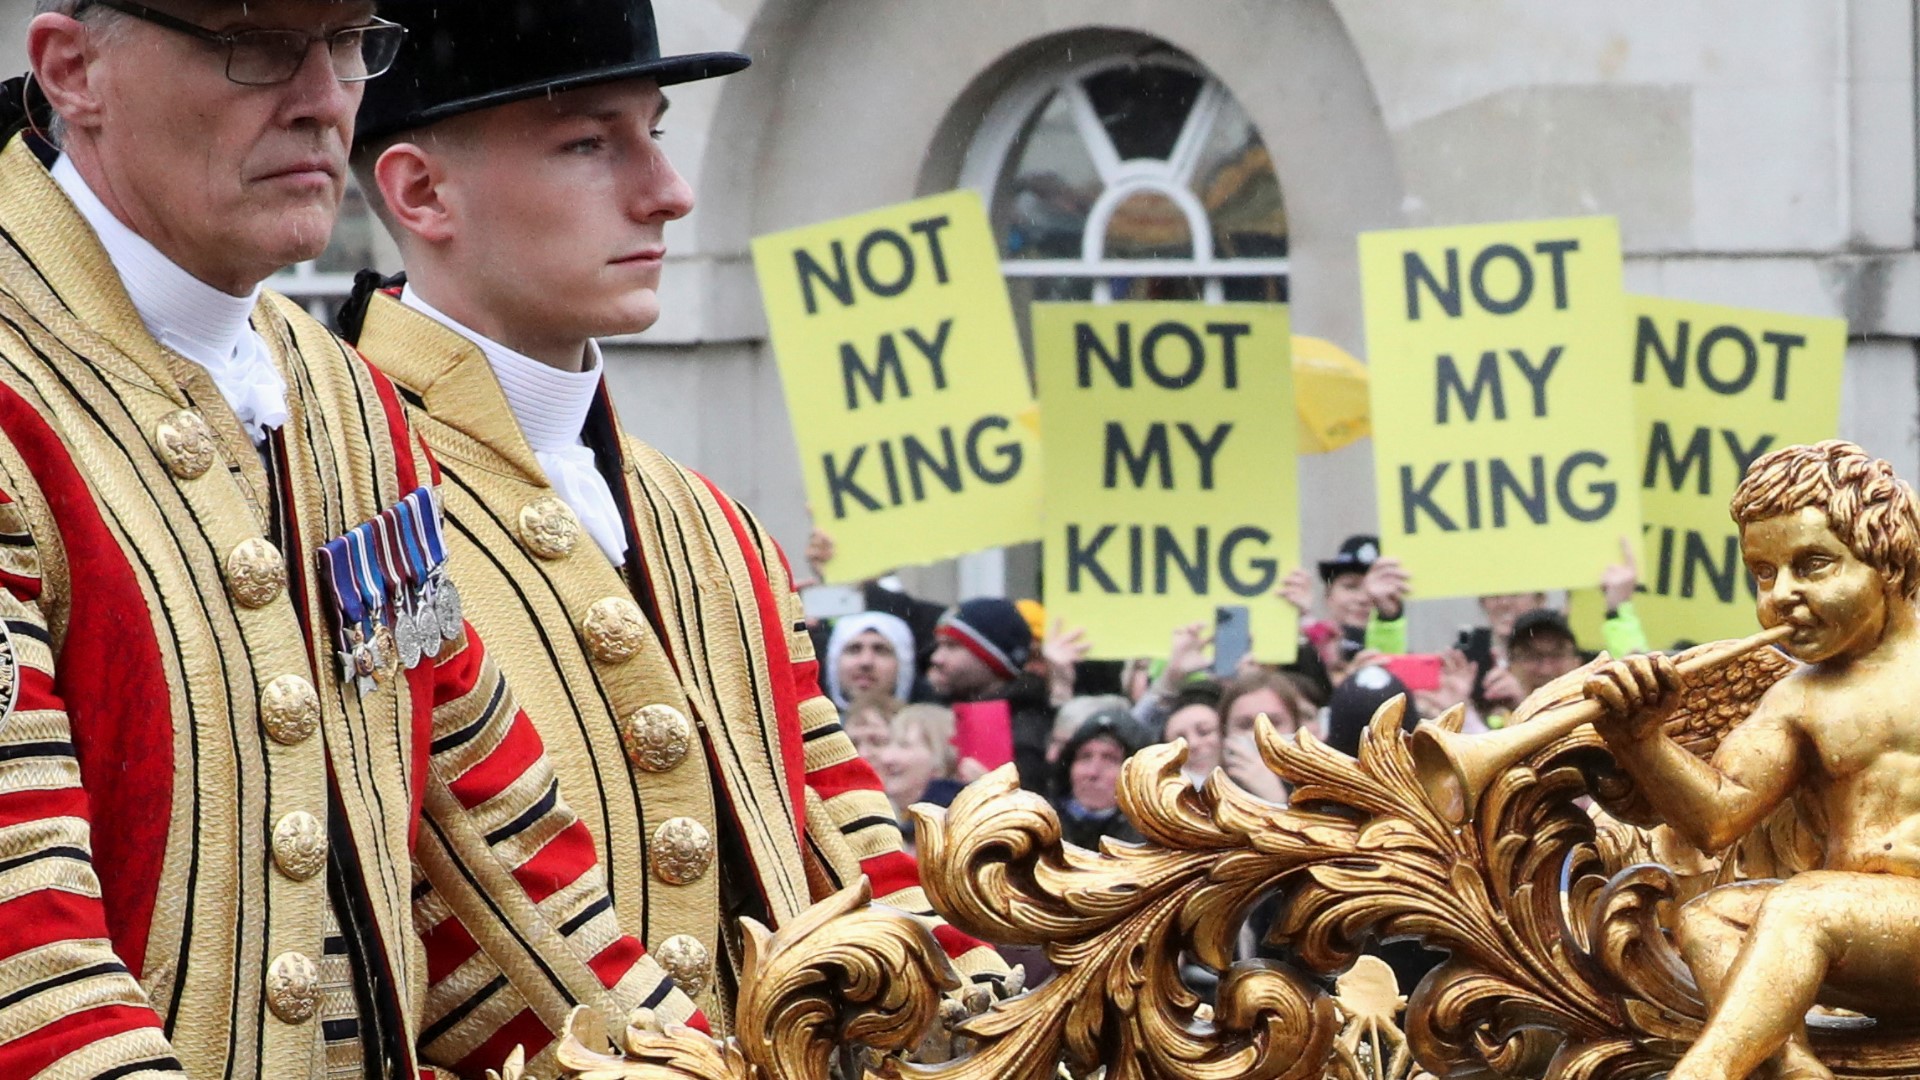 The anti-monarchy group Republic said several of its members have been arrested as they prepared to protest the coronation of King Charles III.